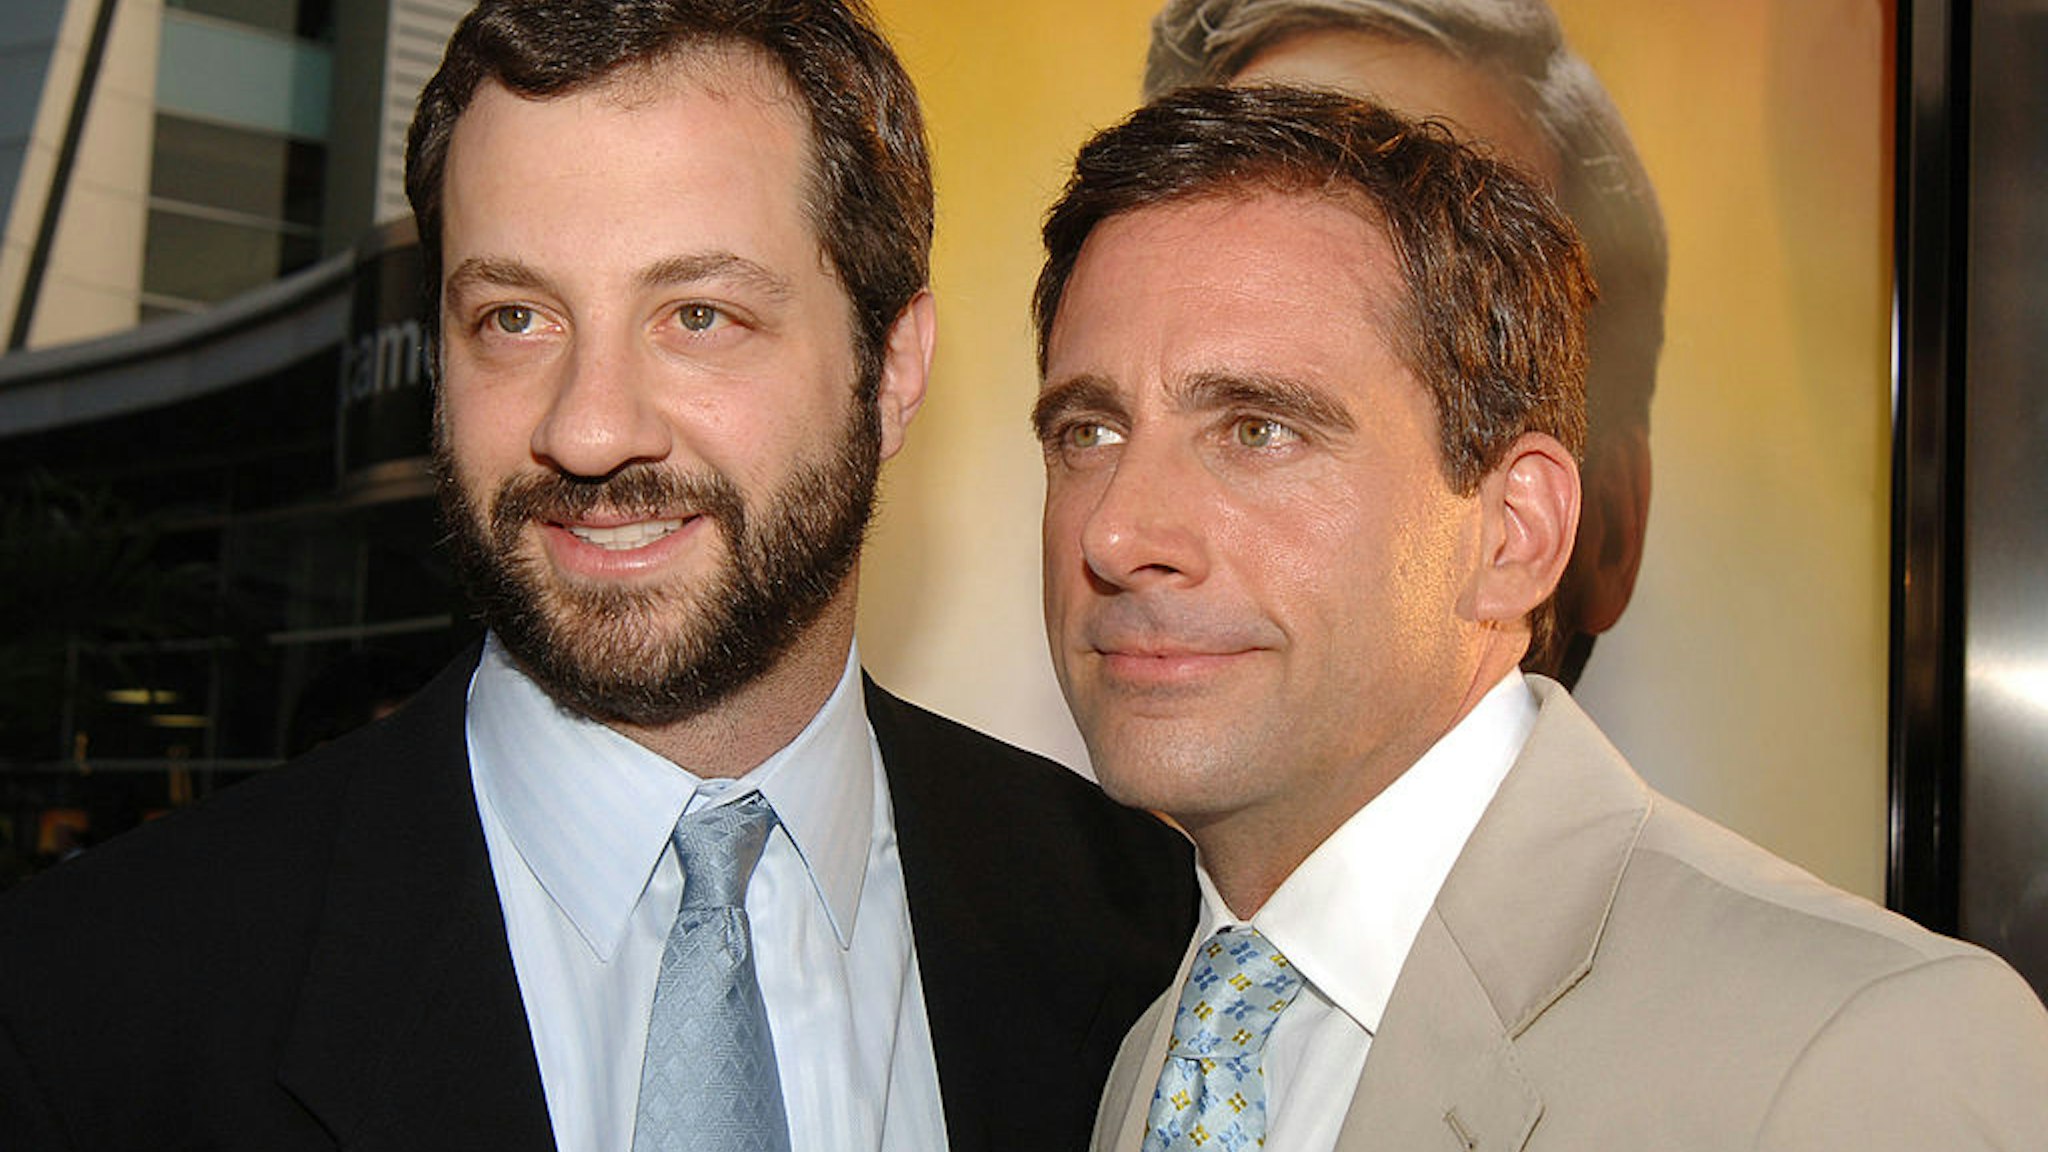 Judd Apatow, director, and Steve Carell during "The 40-Year-Old Virgin" Los Angeles Premiere - Red Carpet at Arclight Hollywood in Los Angeles, California, United States. (Photo by J.Sciulli/WireImage)